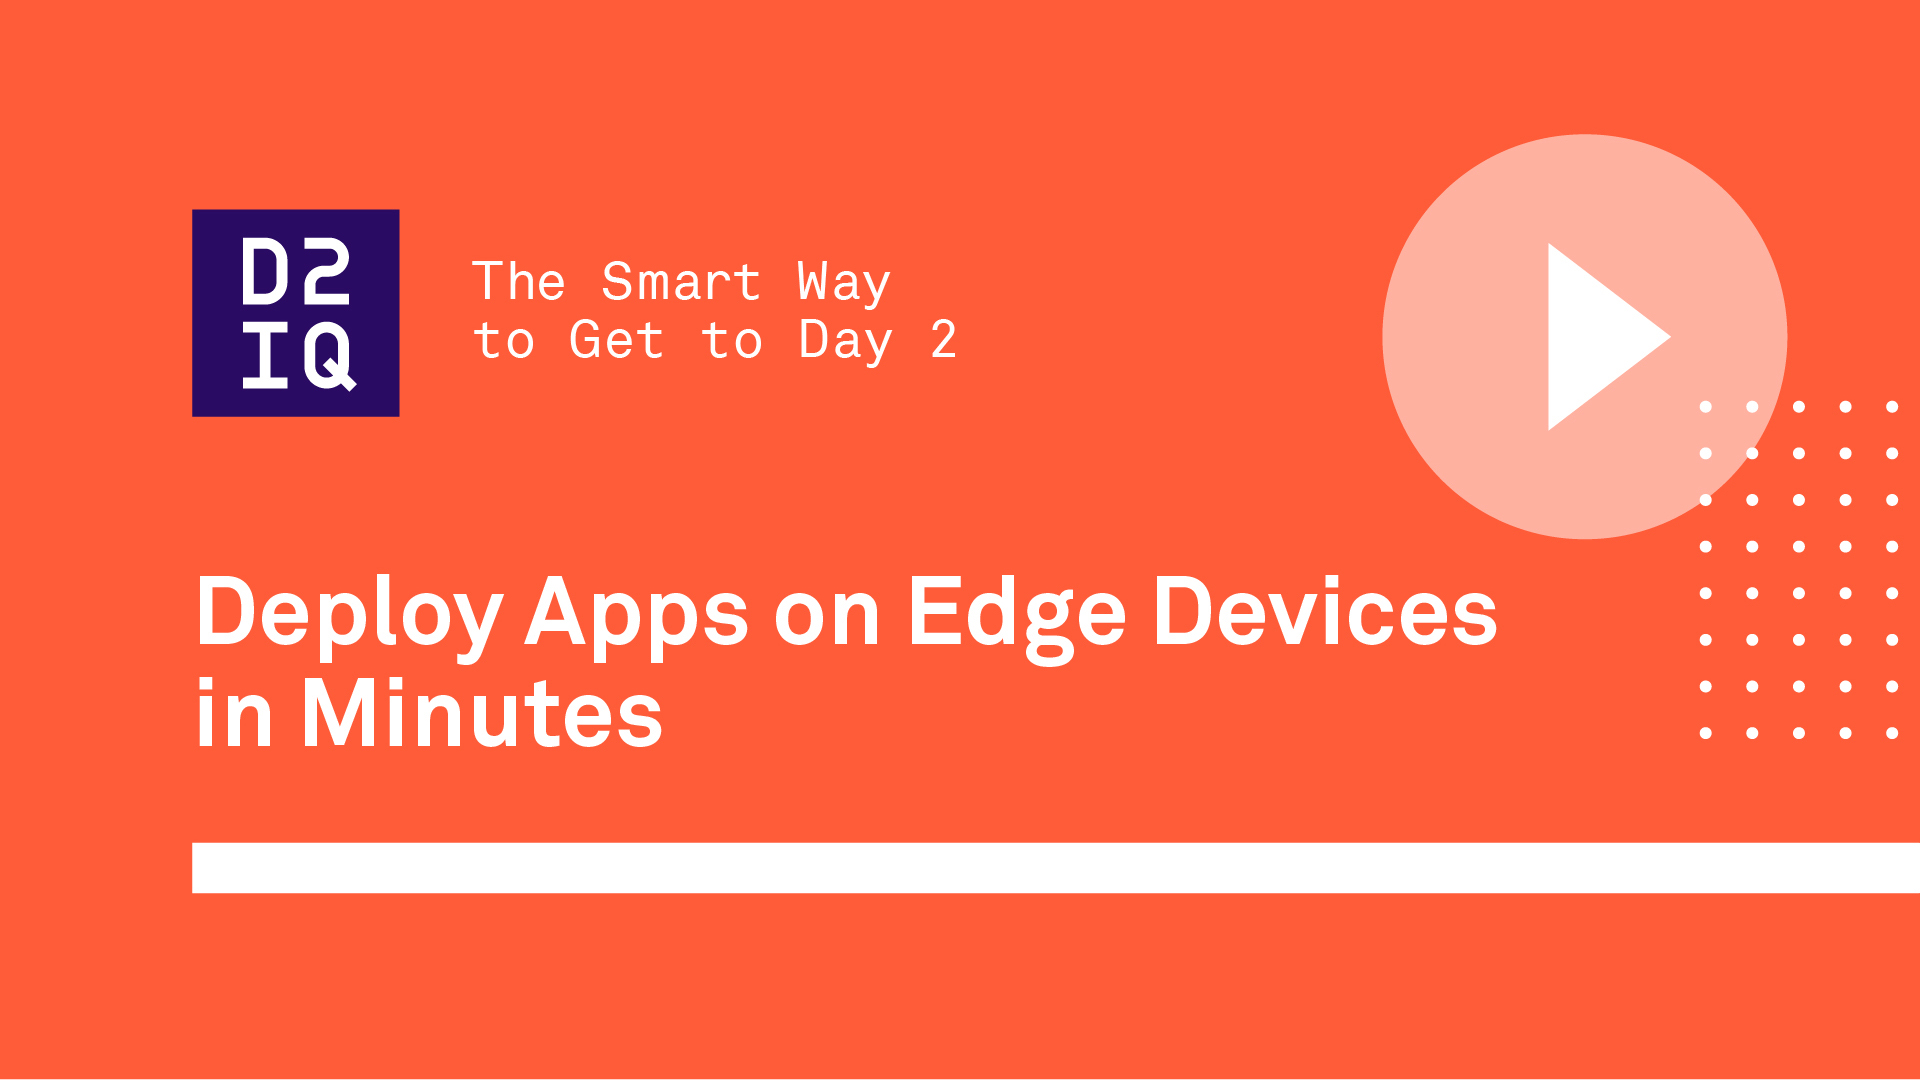 Deploy Apps on Edge Devices in Minutes